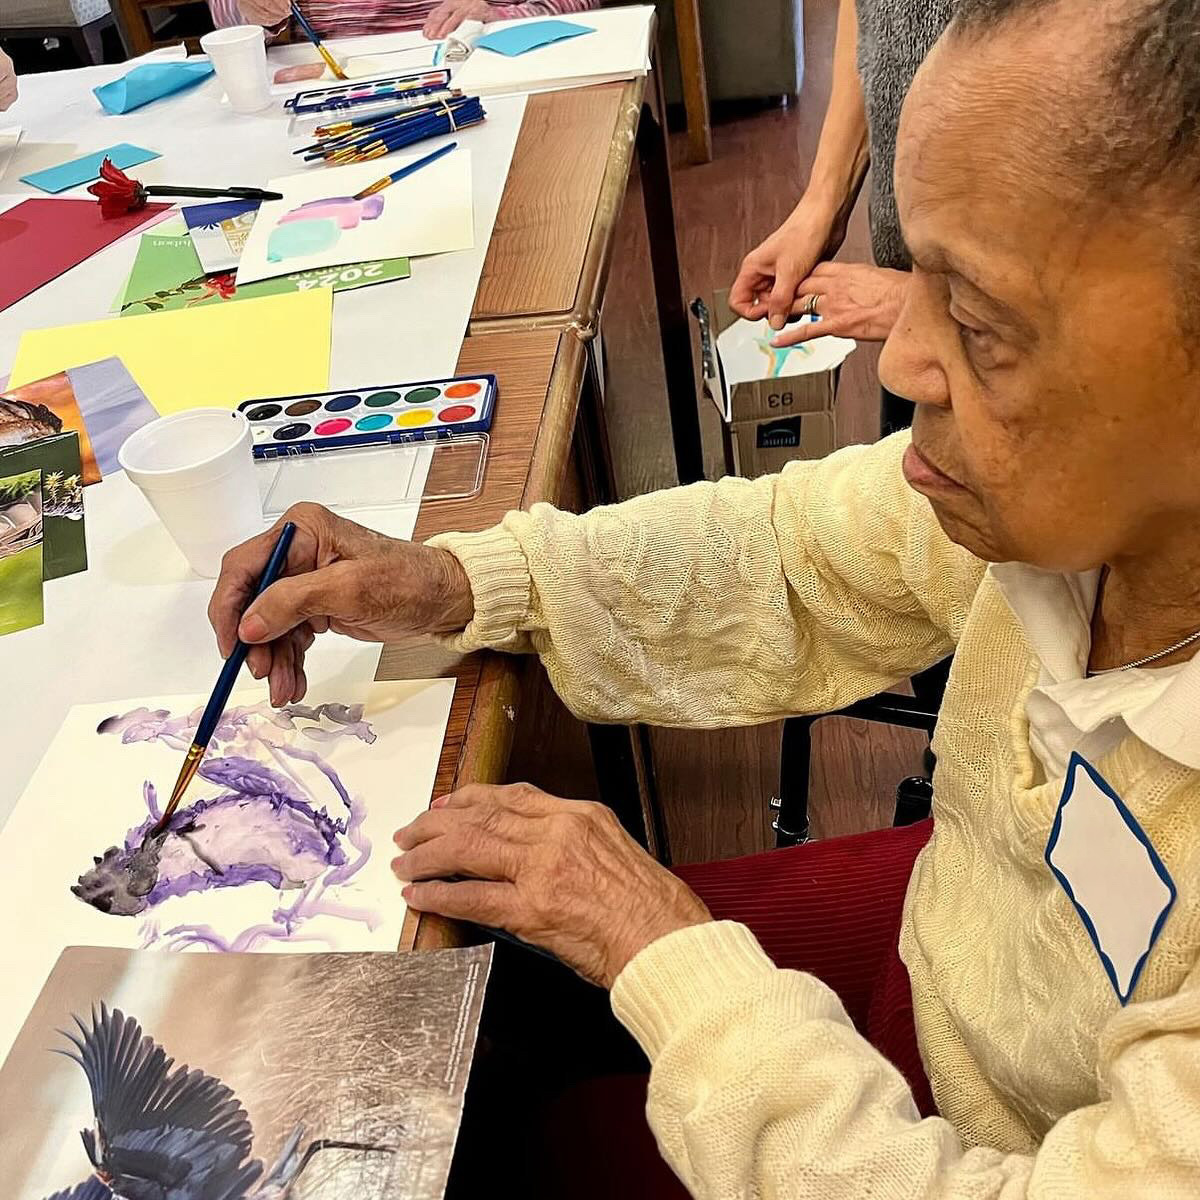 Memories in the Making participant painting with watercolor